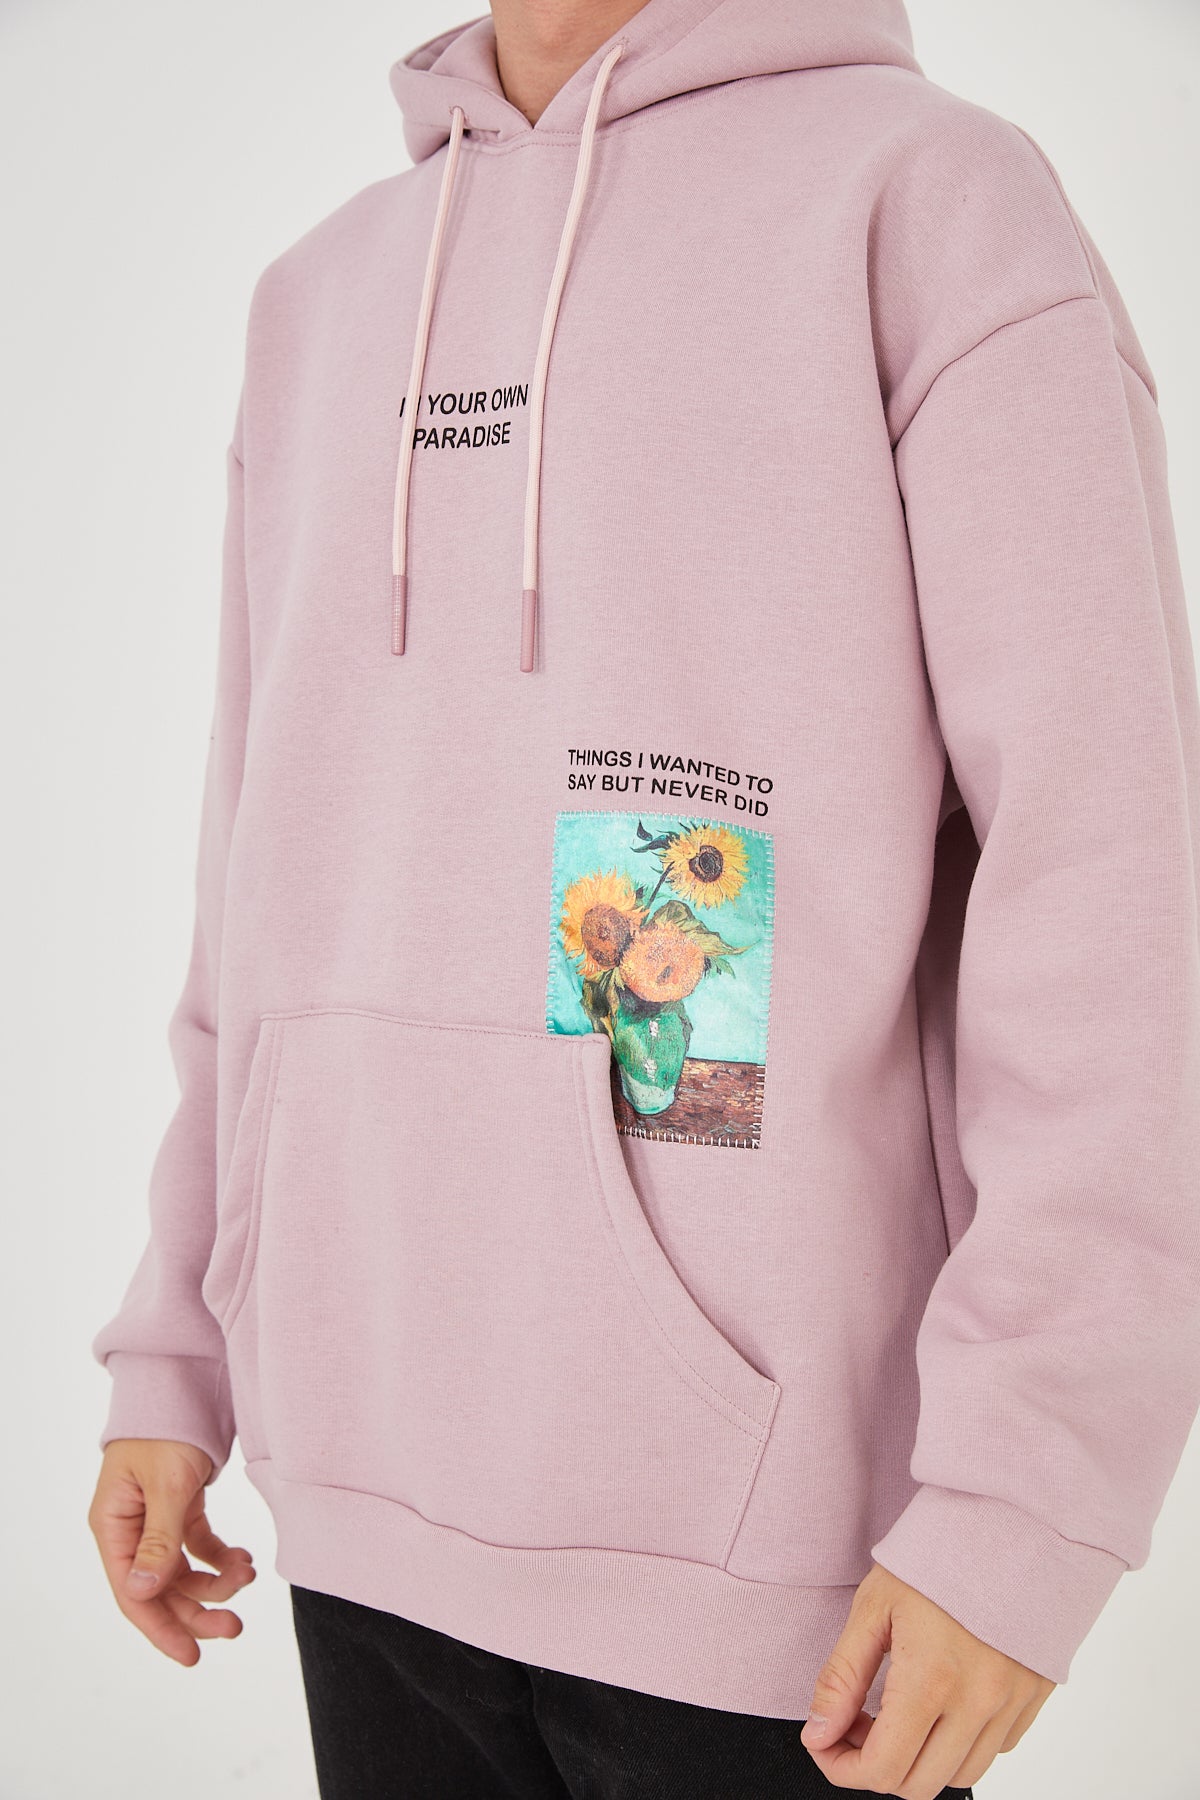 HOODIE - IN YOUR OWN PARADISE - PINK - DYS-Amsterdam